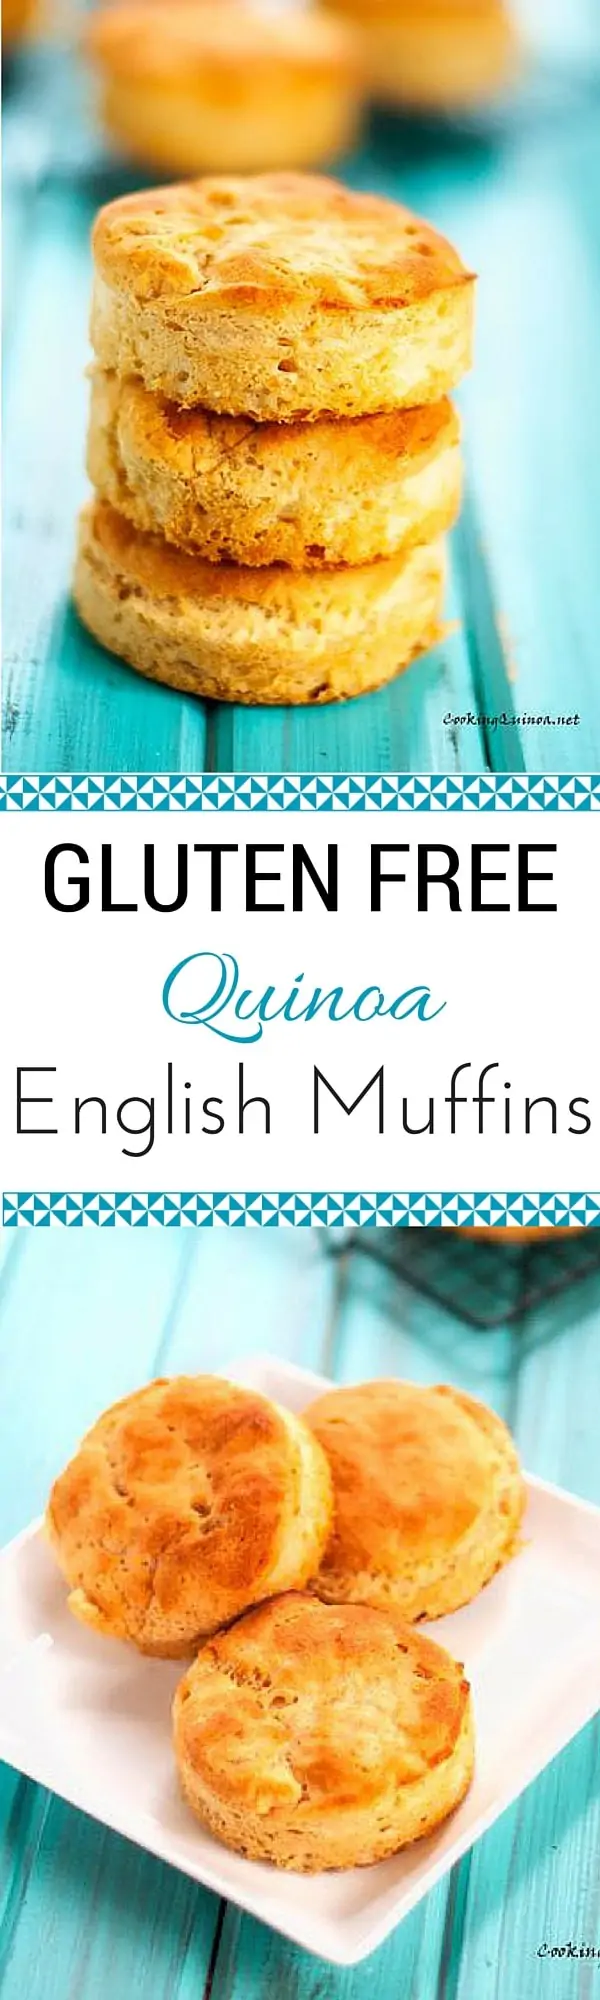 Gluten Free Quinoa English Muffins - It is hard to believe these English Muffins are gluten free. They are a family favorite! I have to make a double batch and freeze. So good! - WendyPolisi.com